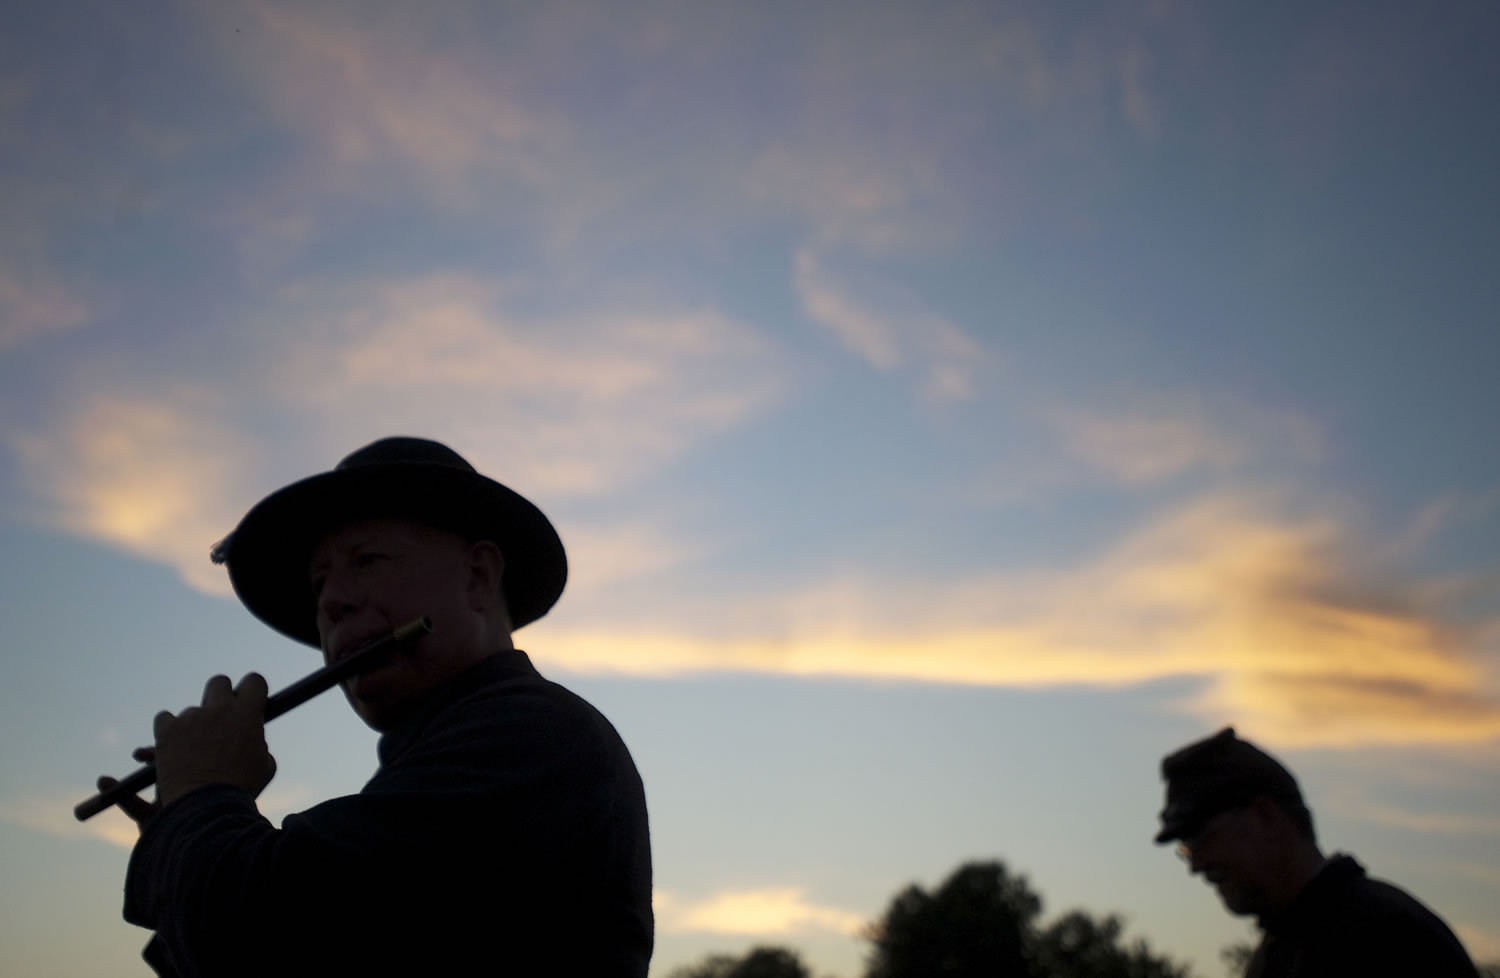 Mitch Rice, of Milwaukie, Ore., plays &quot;When Johnny Comes Marching Home&quot; on the flute during the Campfires and Candlelight event at Fort Vancouver National Historic Site on Saturday.